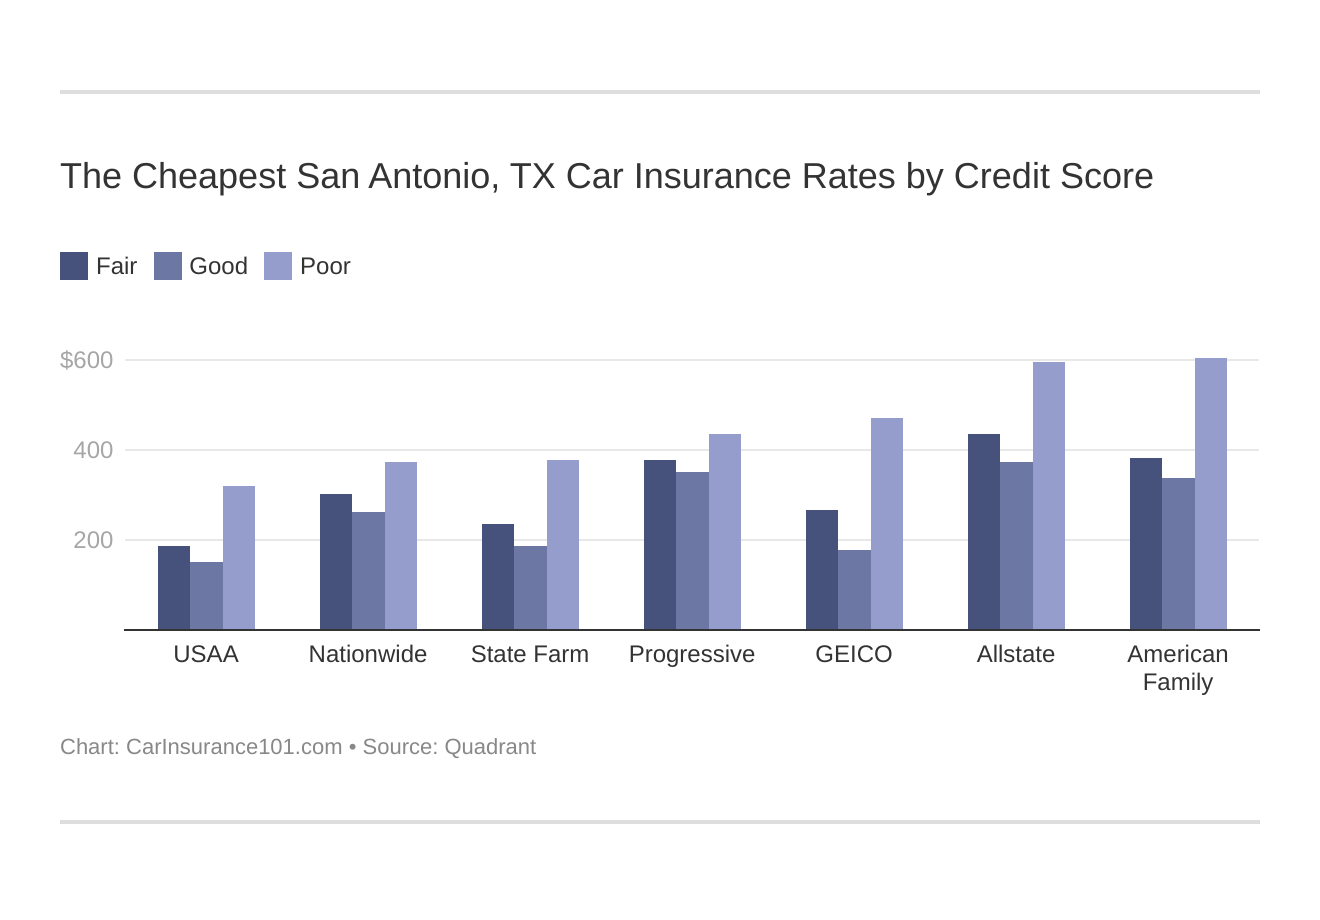 The Cheapest San Antonio, TX Car Insurance Rates by Credit Score